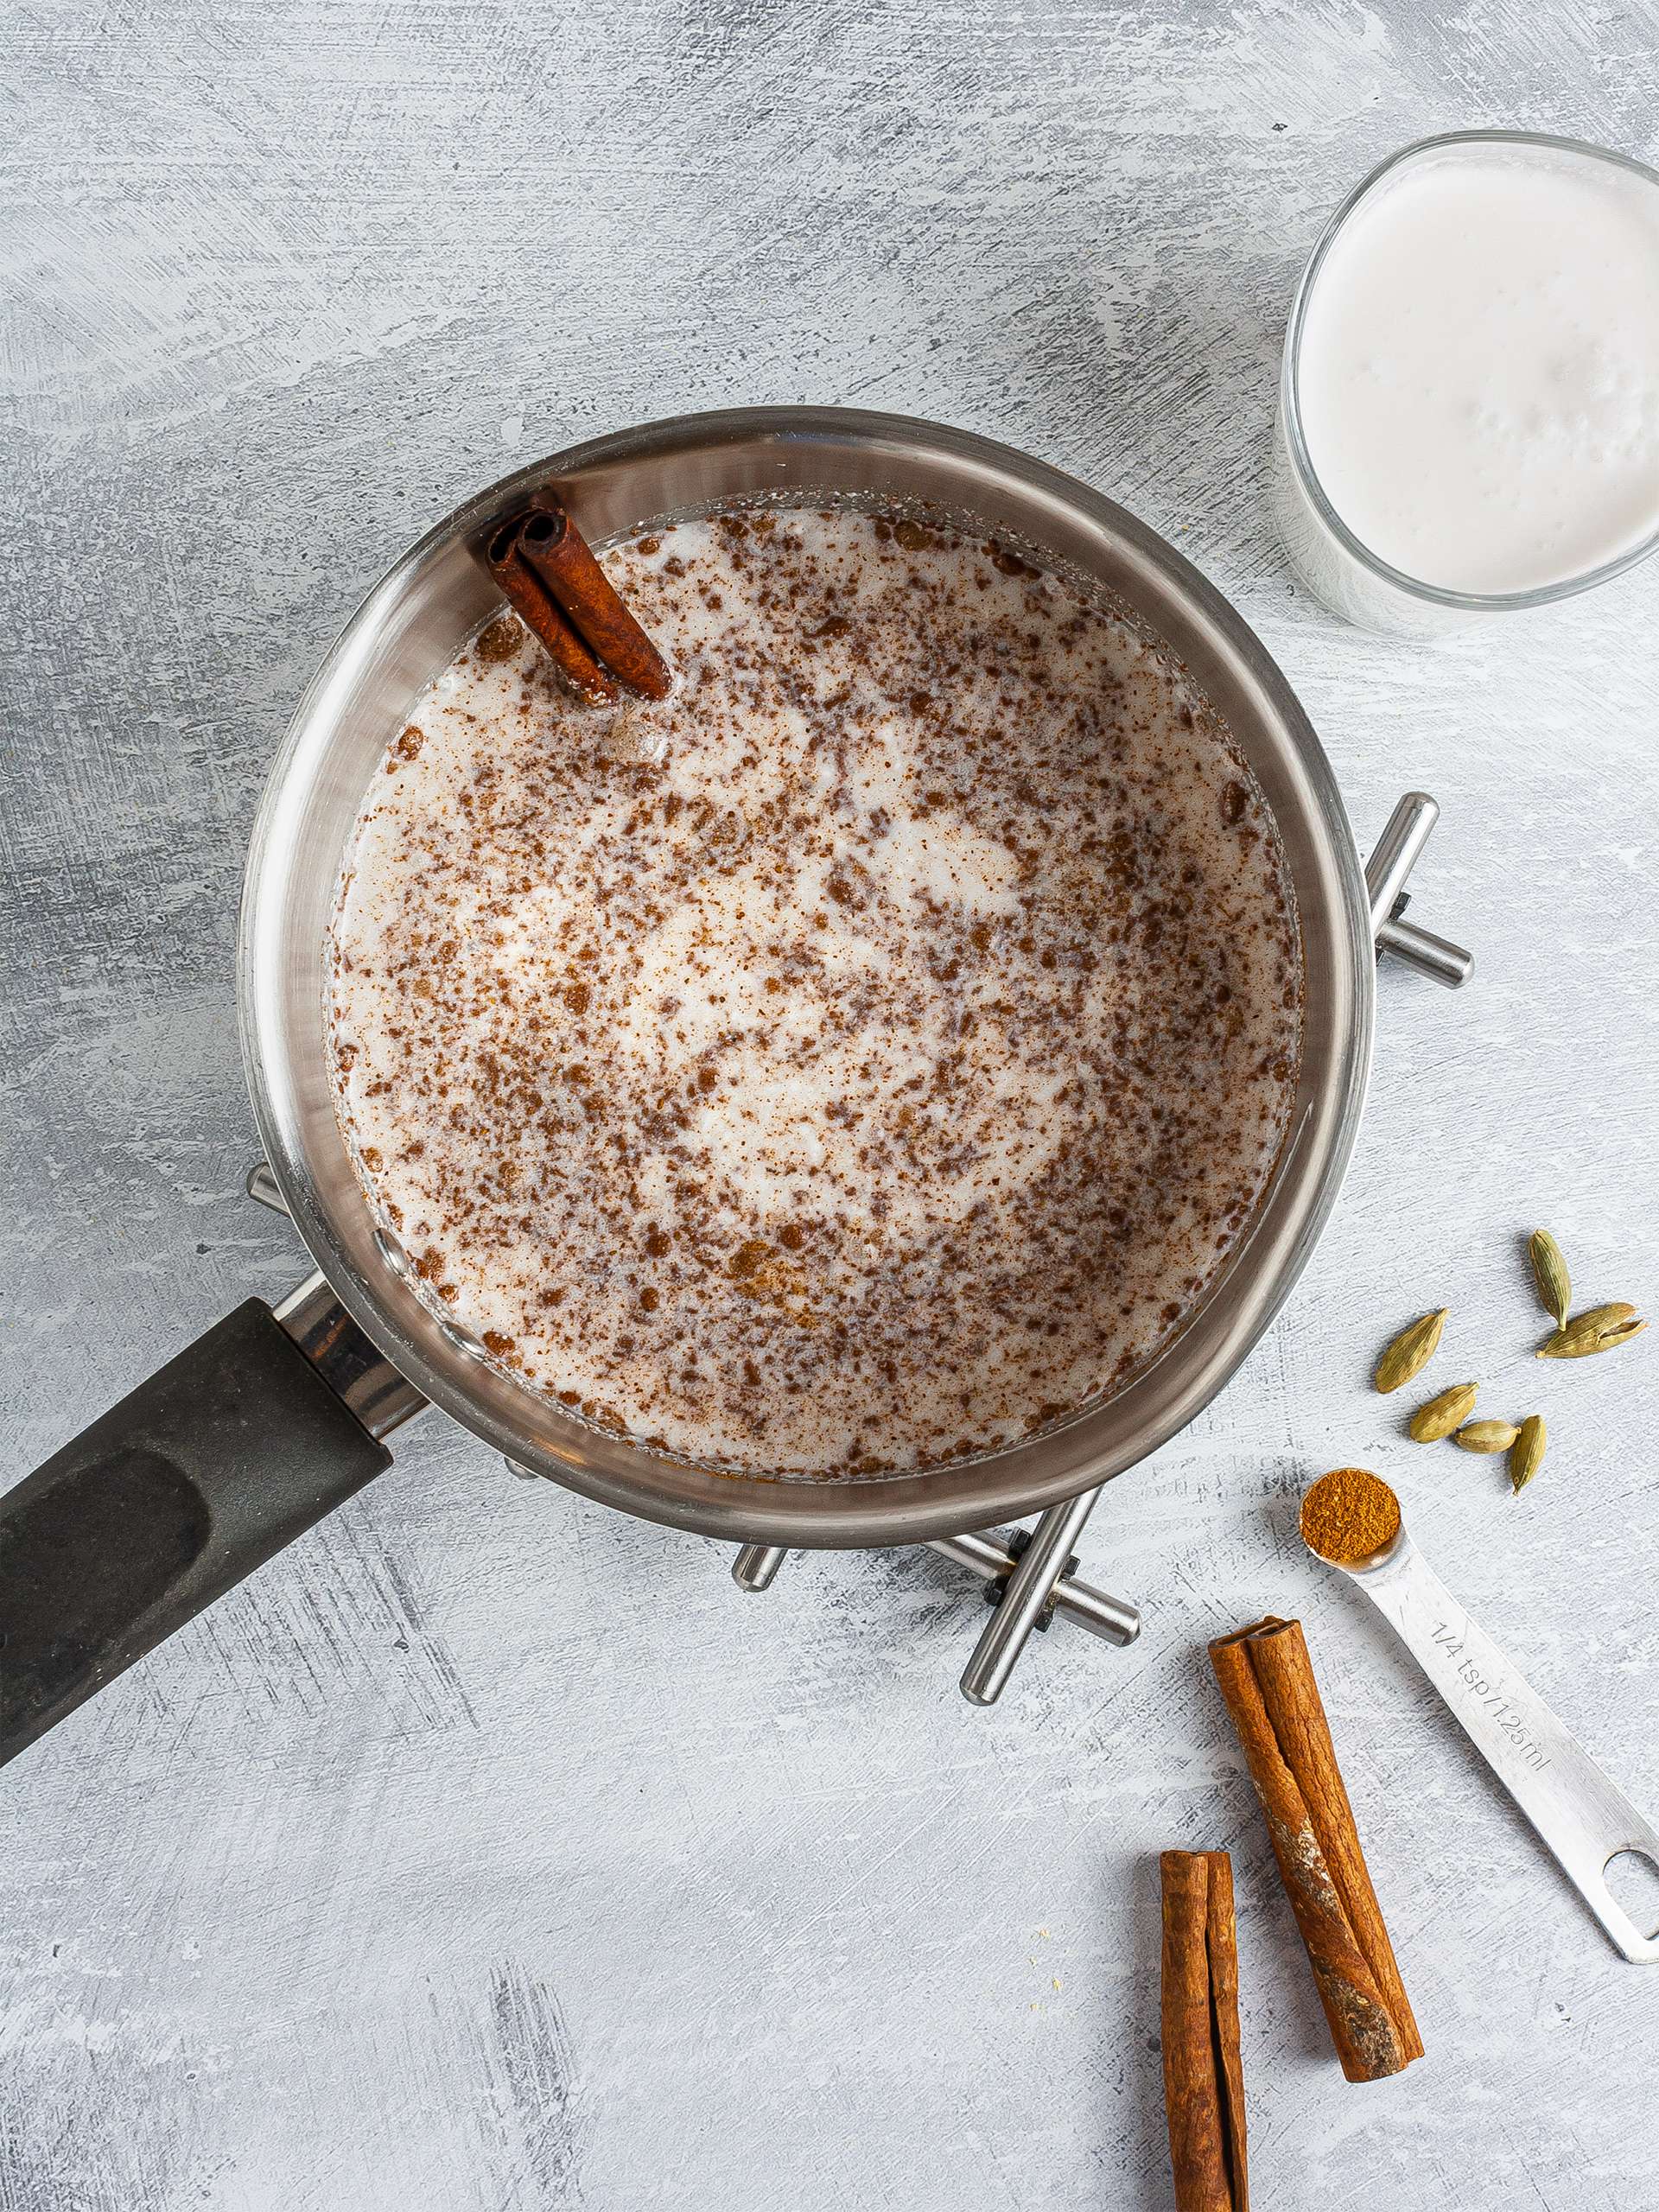 Coconut milk simmering with cinnamon and cardamom